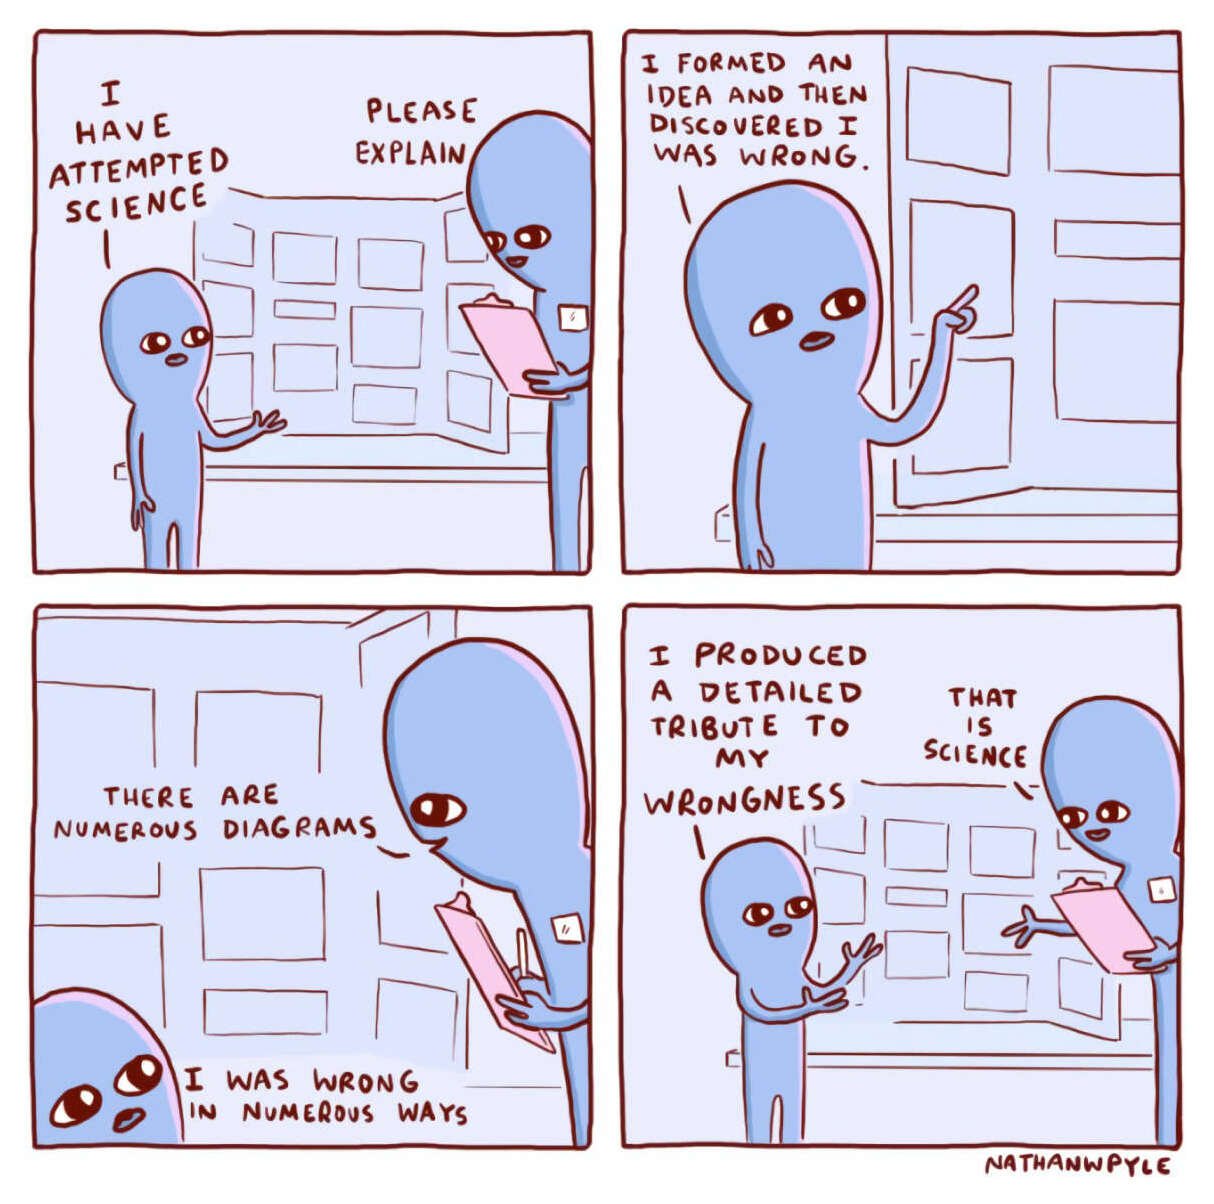 “I have attempted science” (Nathan W. Pyle, Strange Planet 2019)